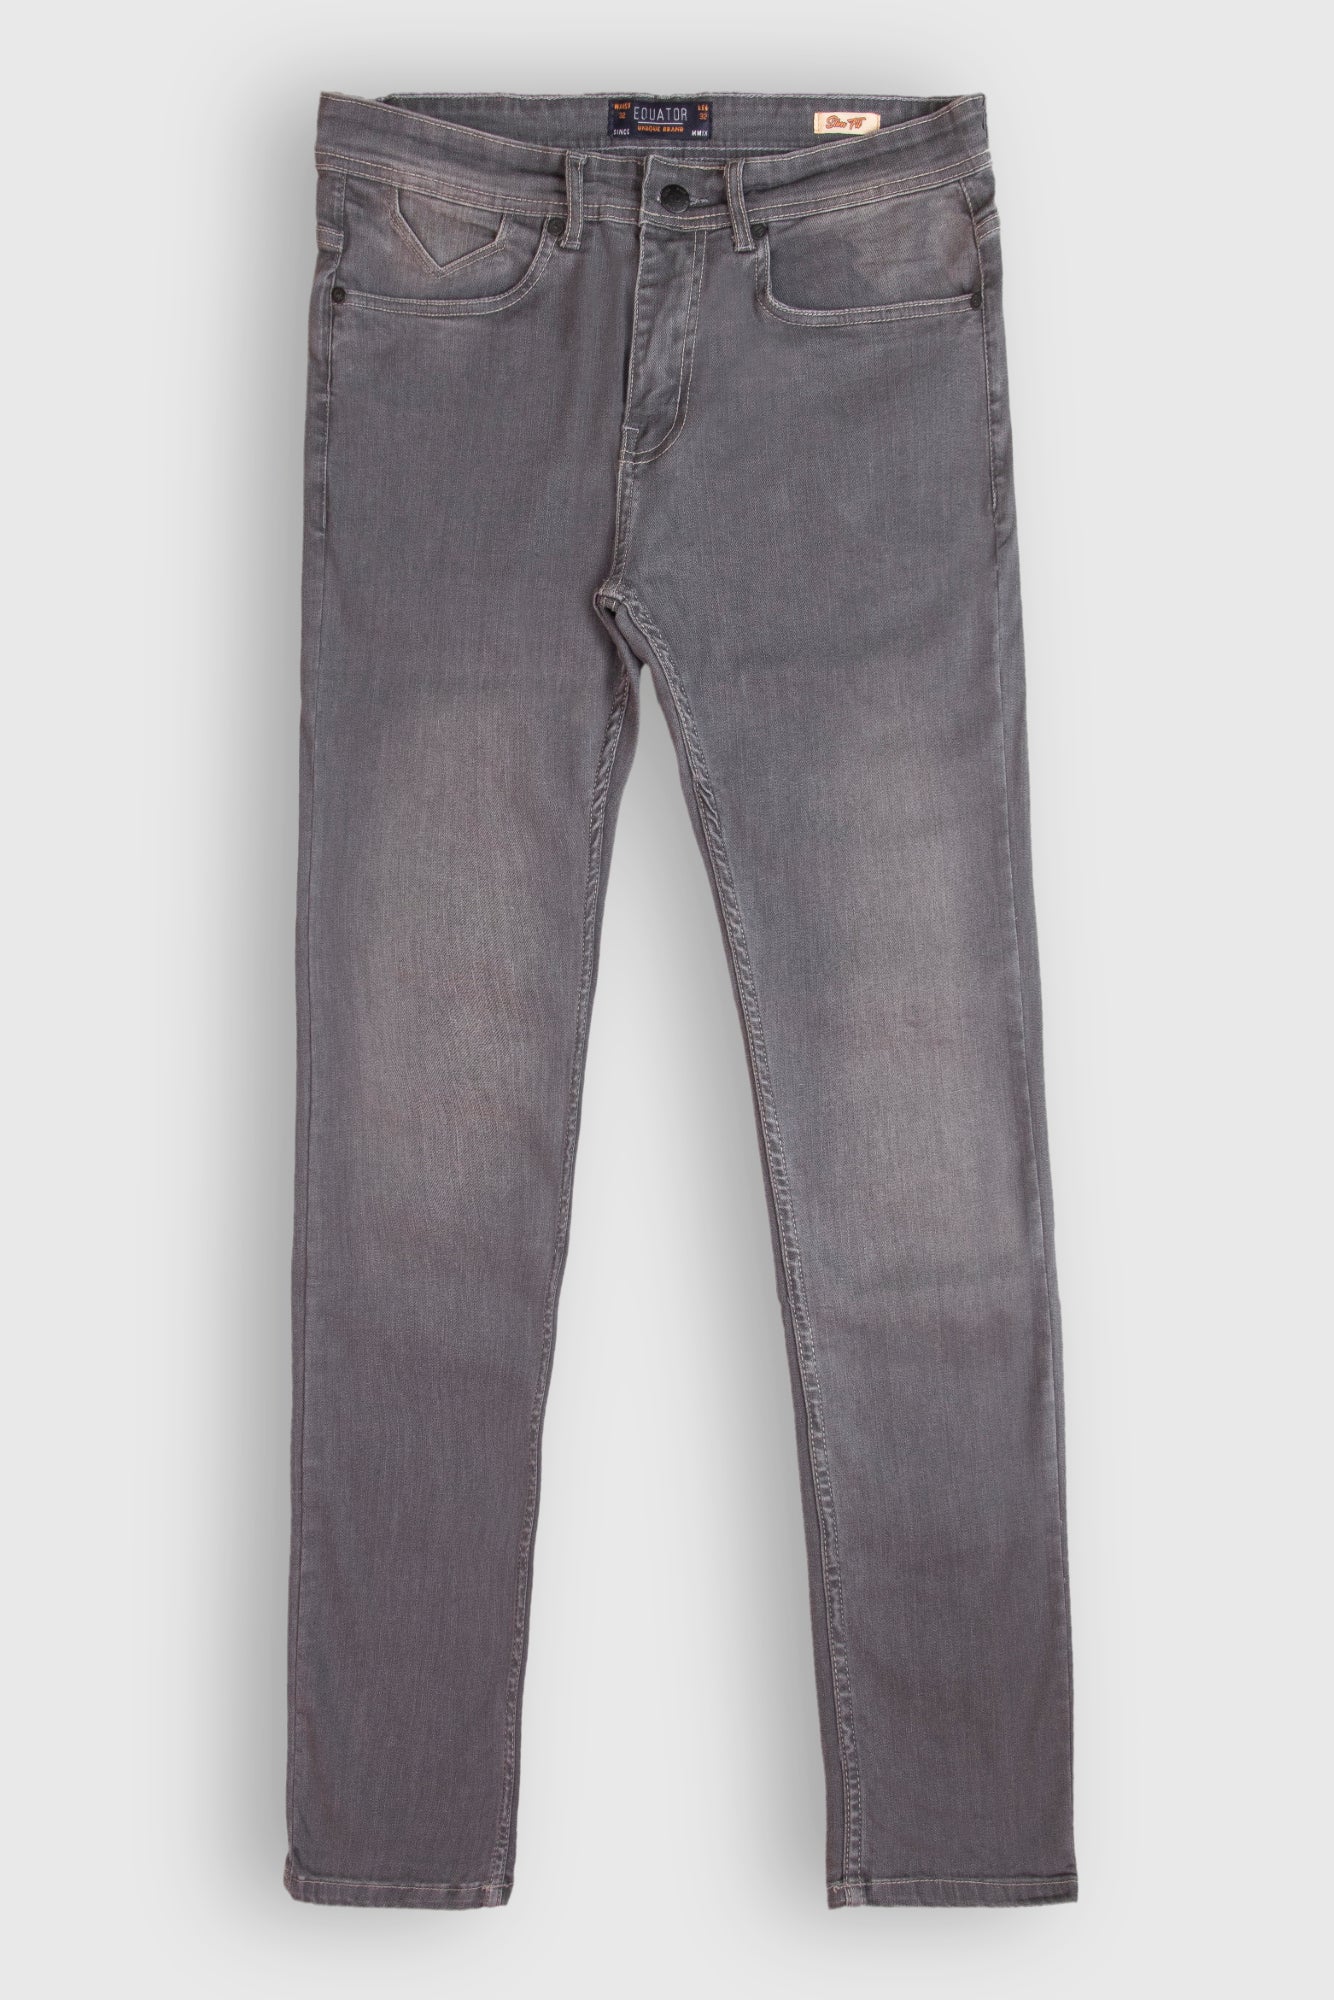 Lead Grey Jeans